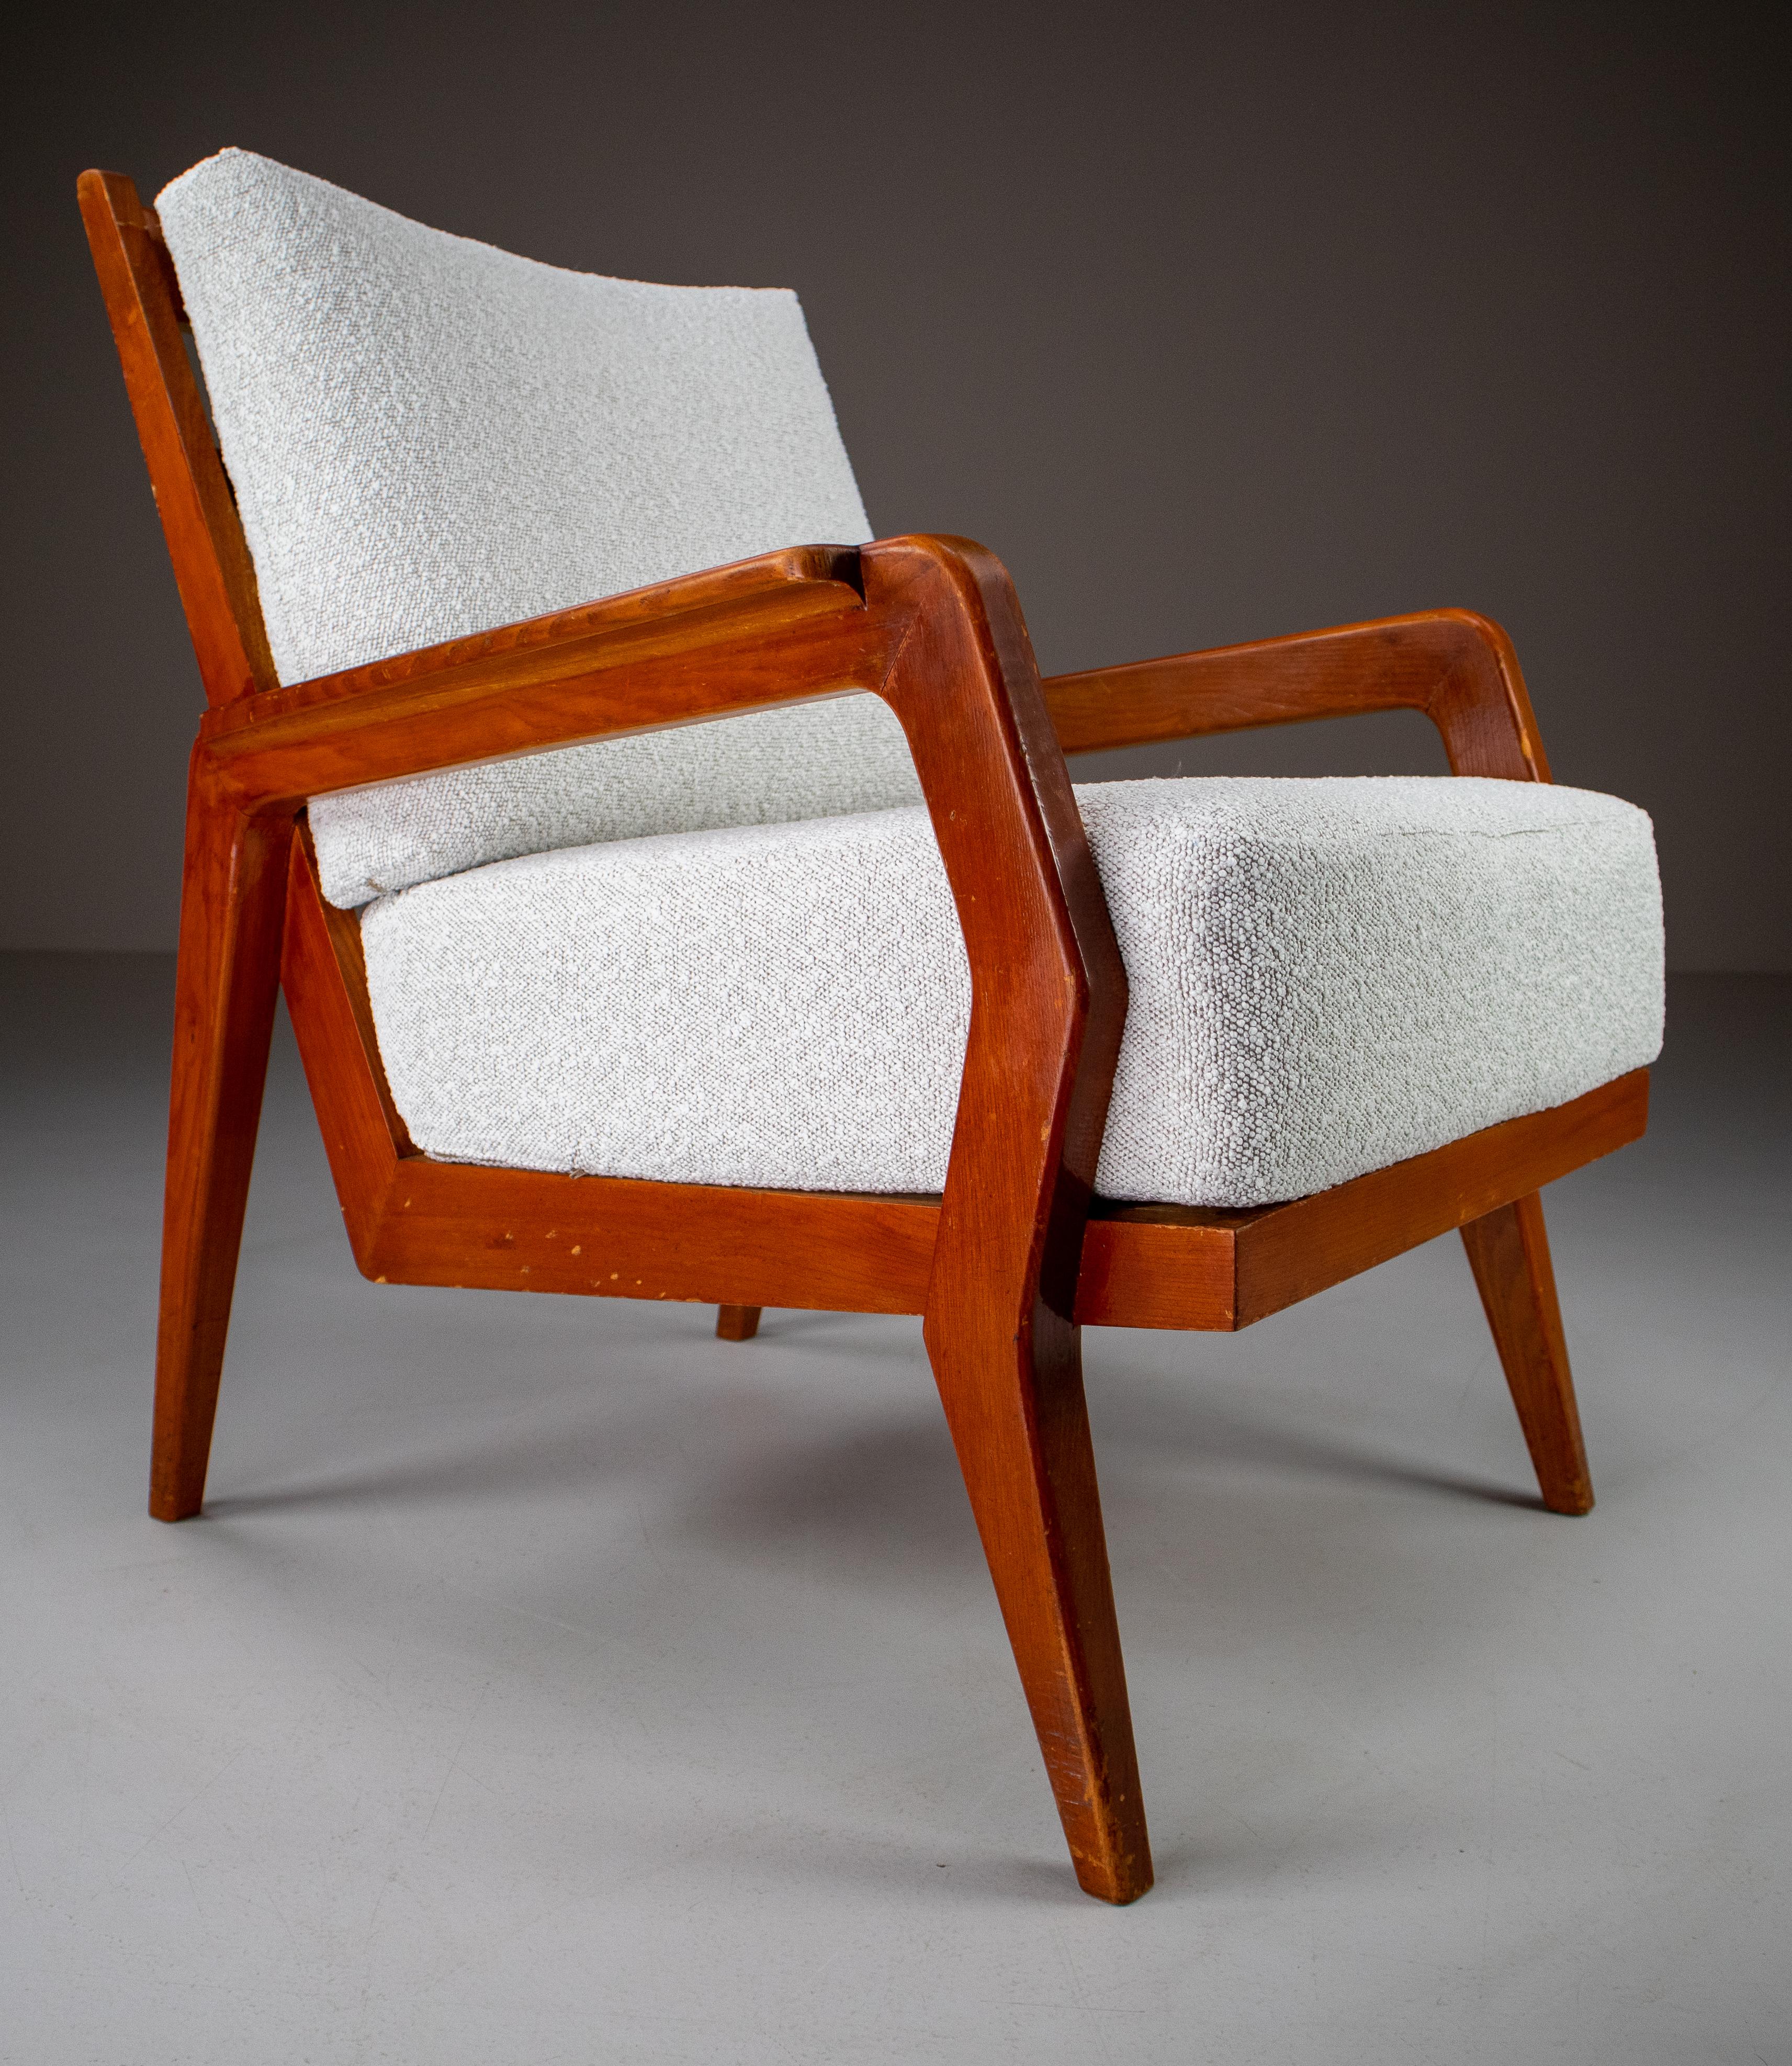 Pair of two original midcentury armchairs or lounge chairs manufactured and designed in France 1950s. Made of solid Ash and professionally reupholstered in reupholstered in bouclé fabric. These armchairs would make an eye-catching addition to any